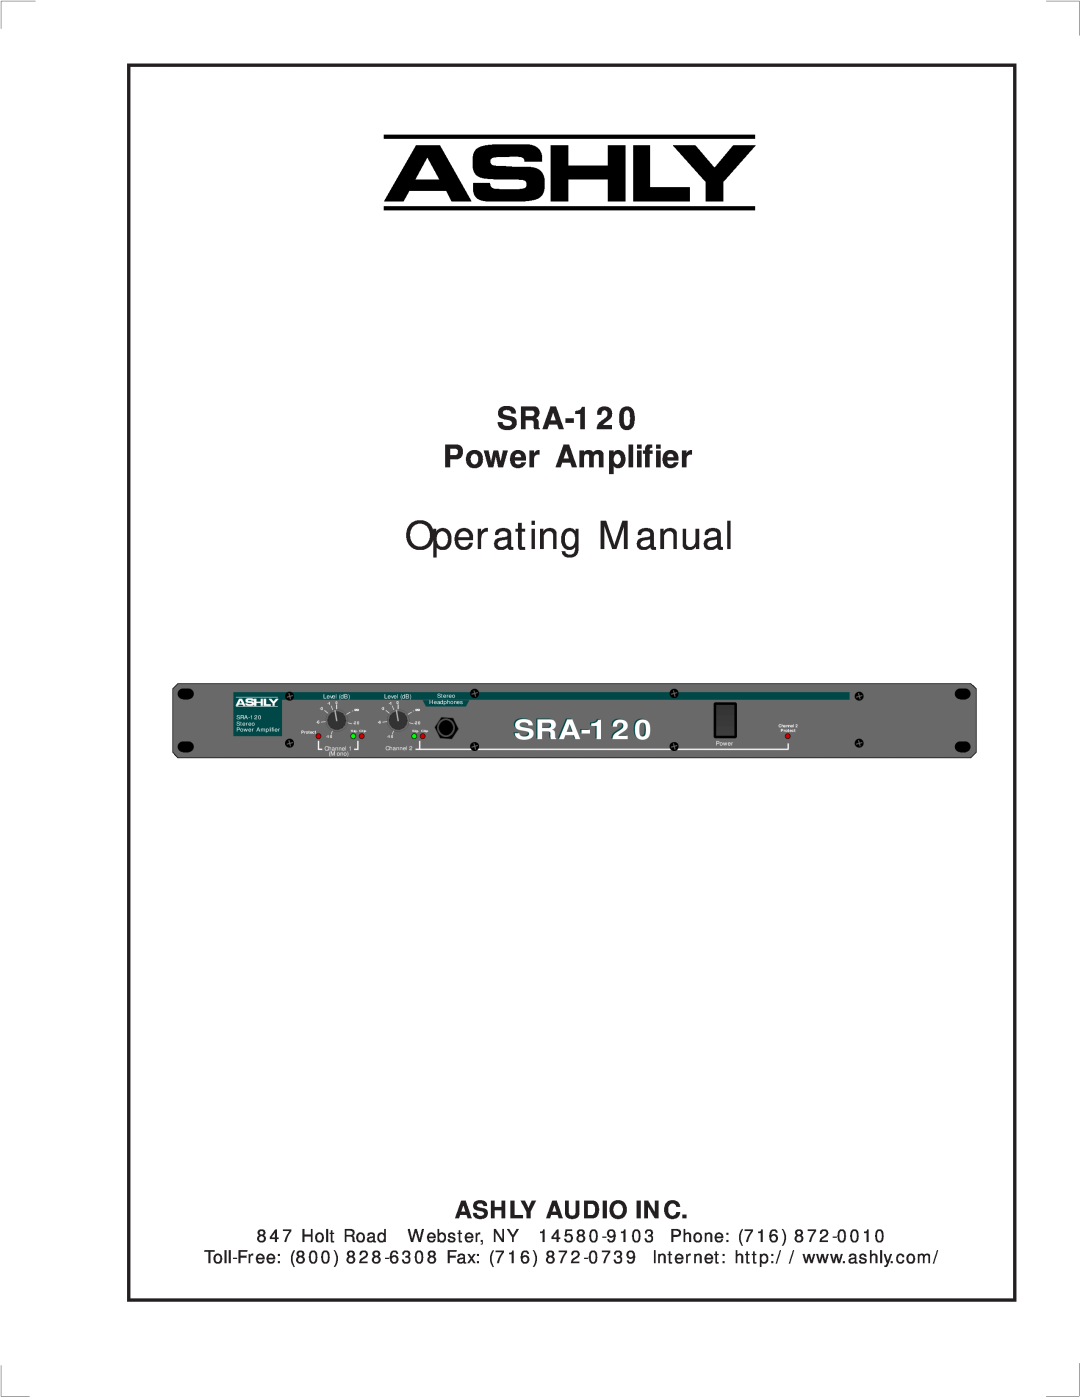 Ashly specifications SRA-120Convection Cooled Amplifier, Architects Specifications, Technical Notes & Specifications 